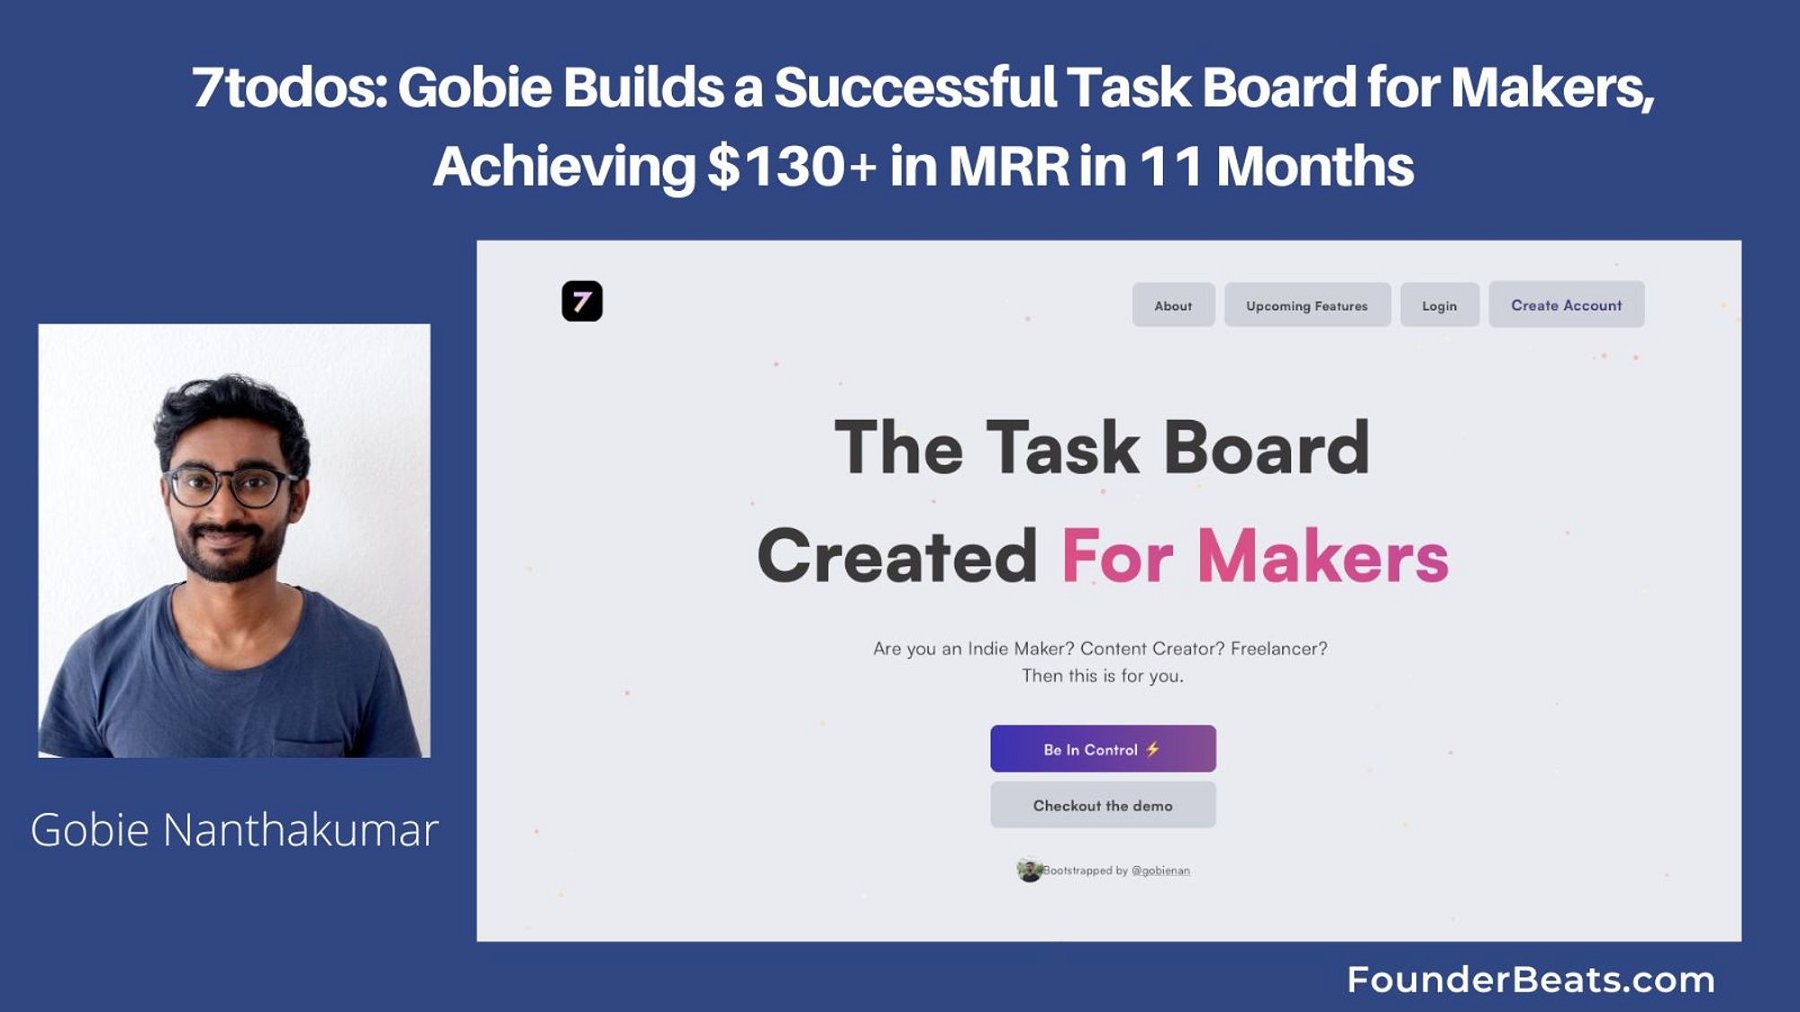 7todos: Gobie Builds a Successful Task Board for Makers, Achieving $130+ in MRR in 11 Months